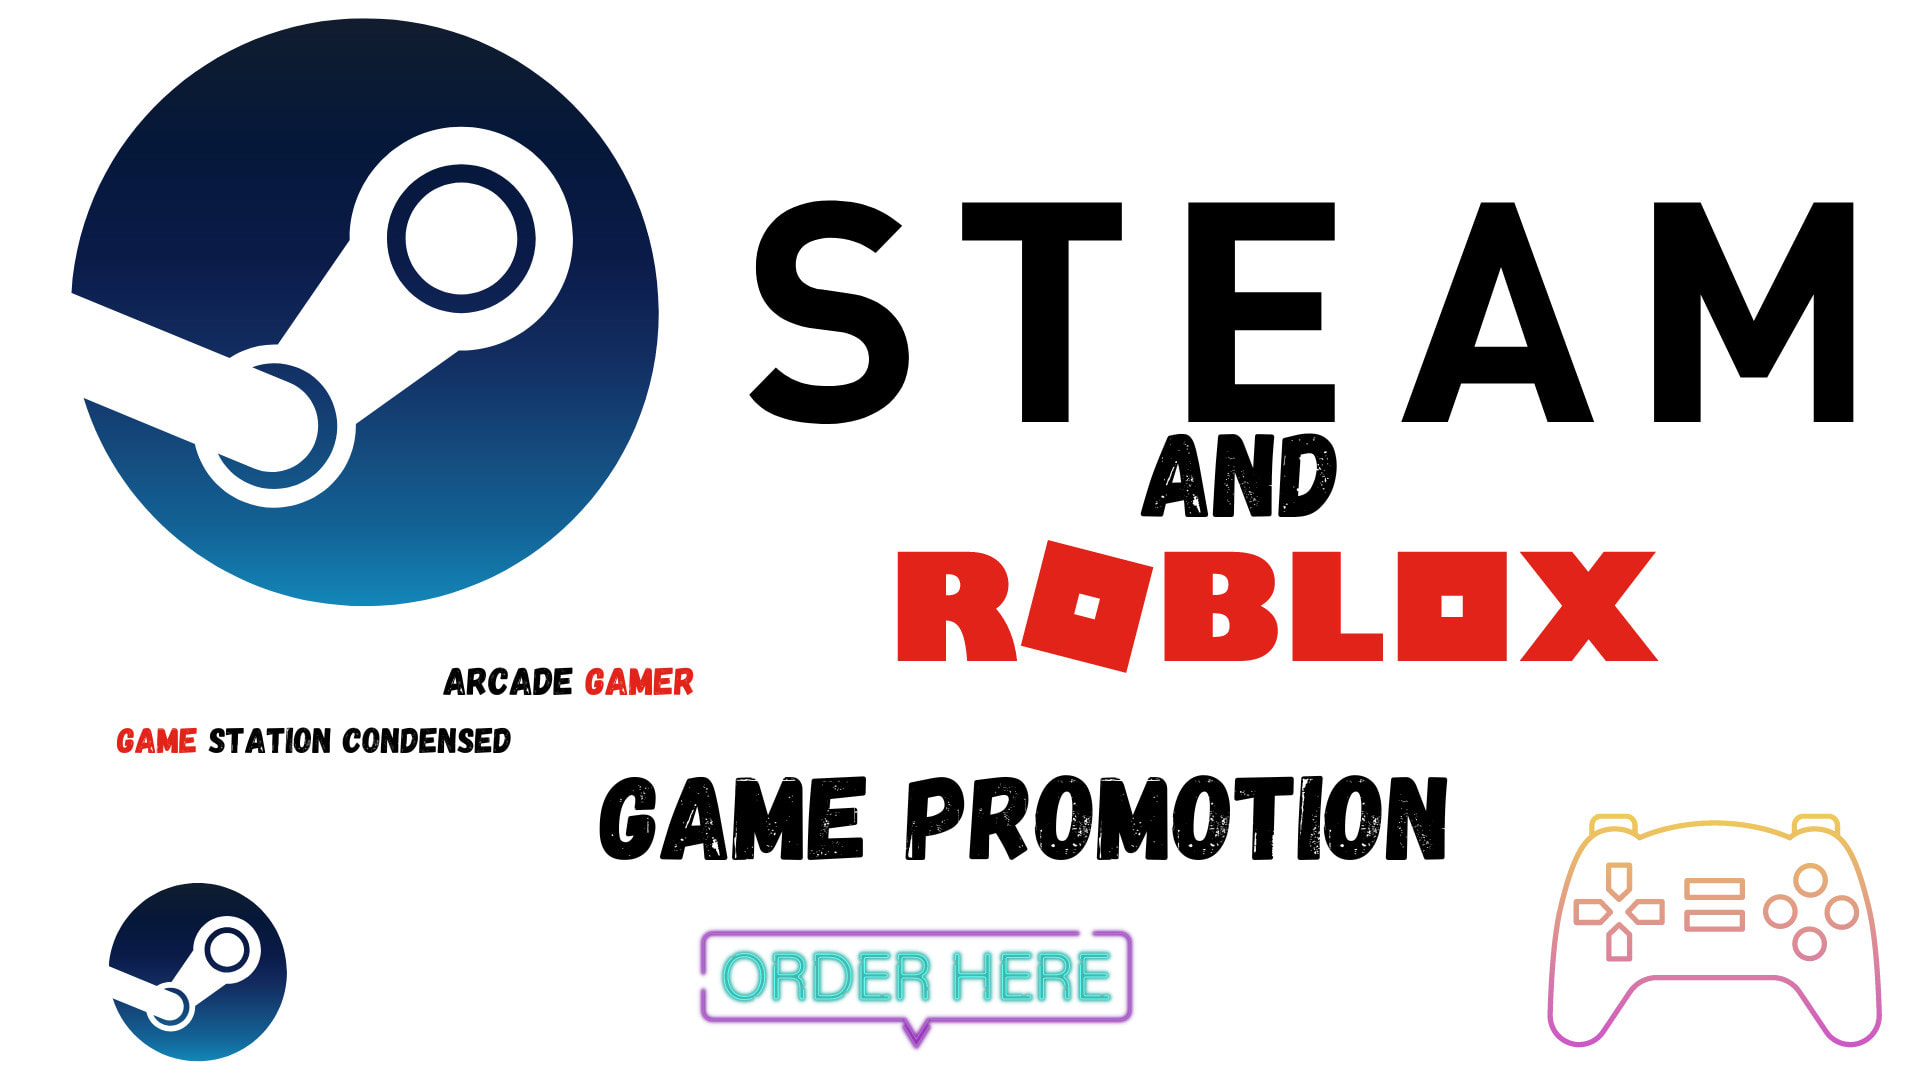 Do organic steam game promotion, roblox game, video games advertising to  gamers by Michealhays